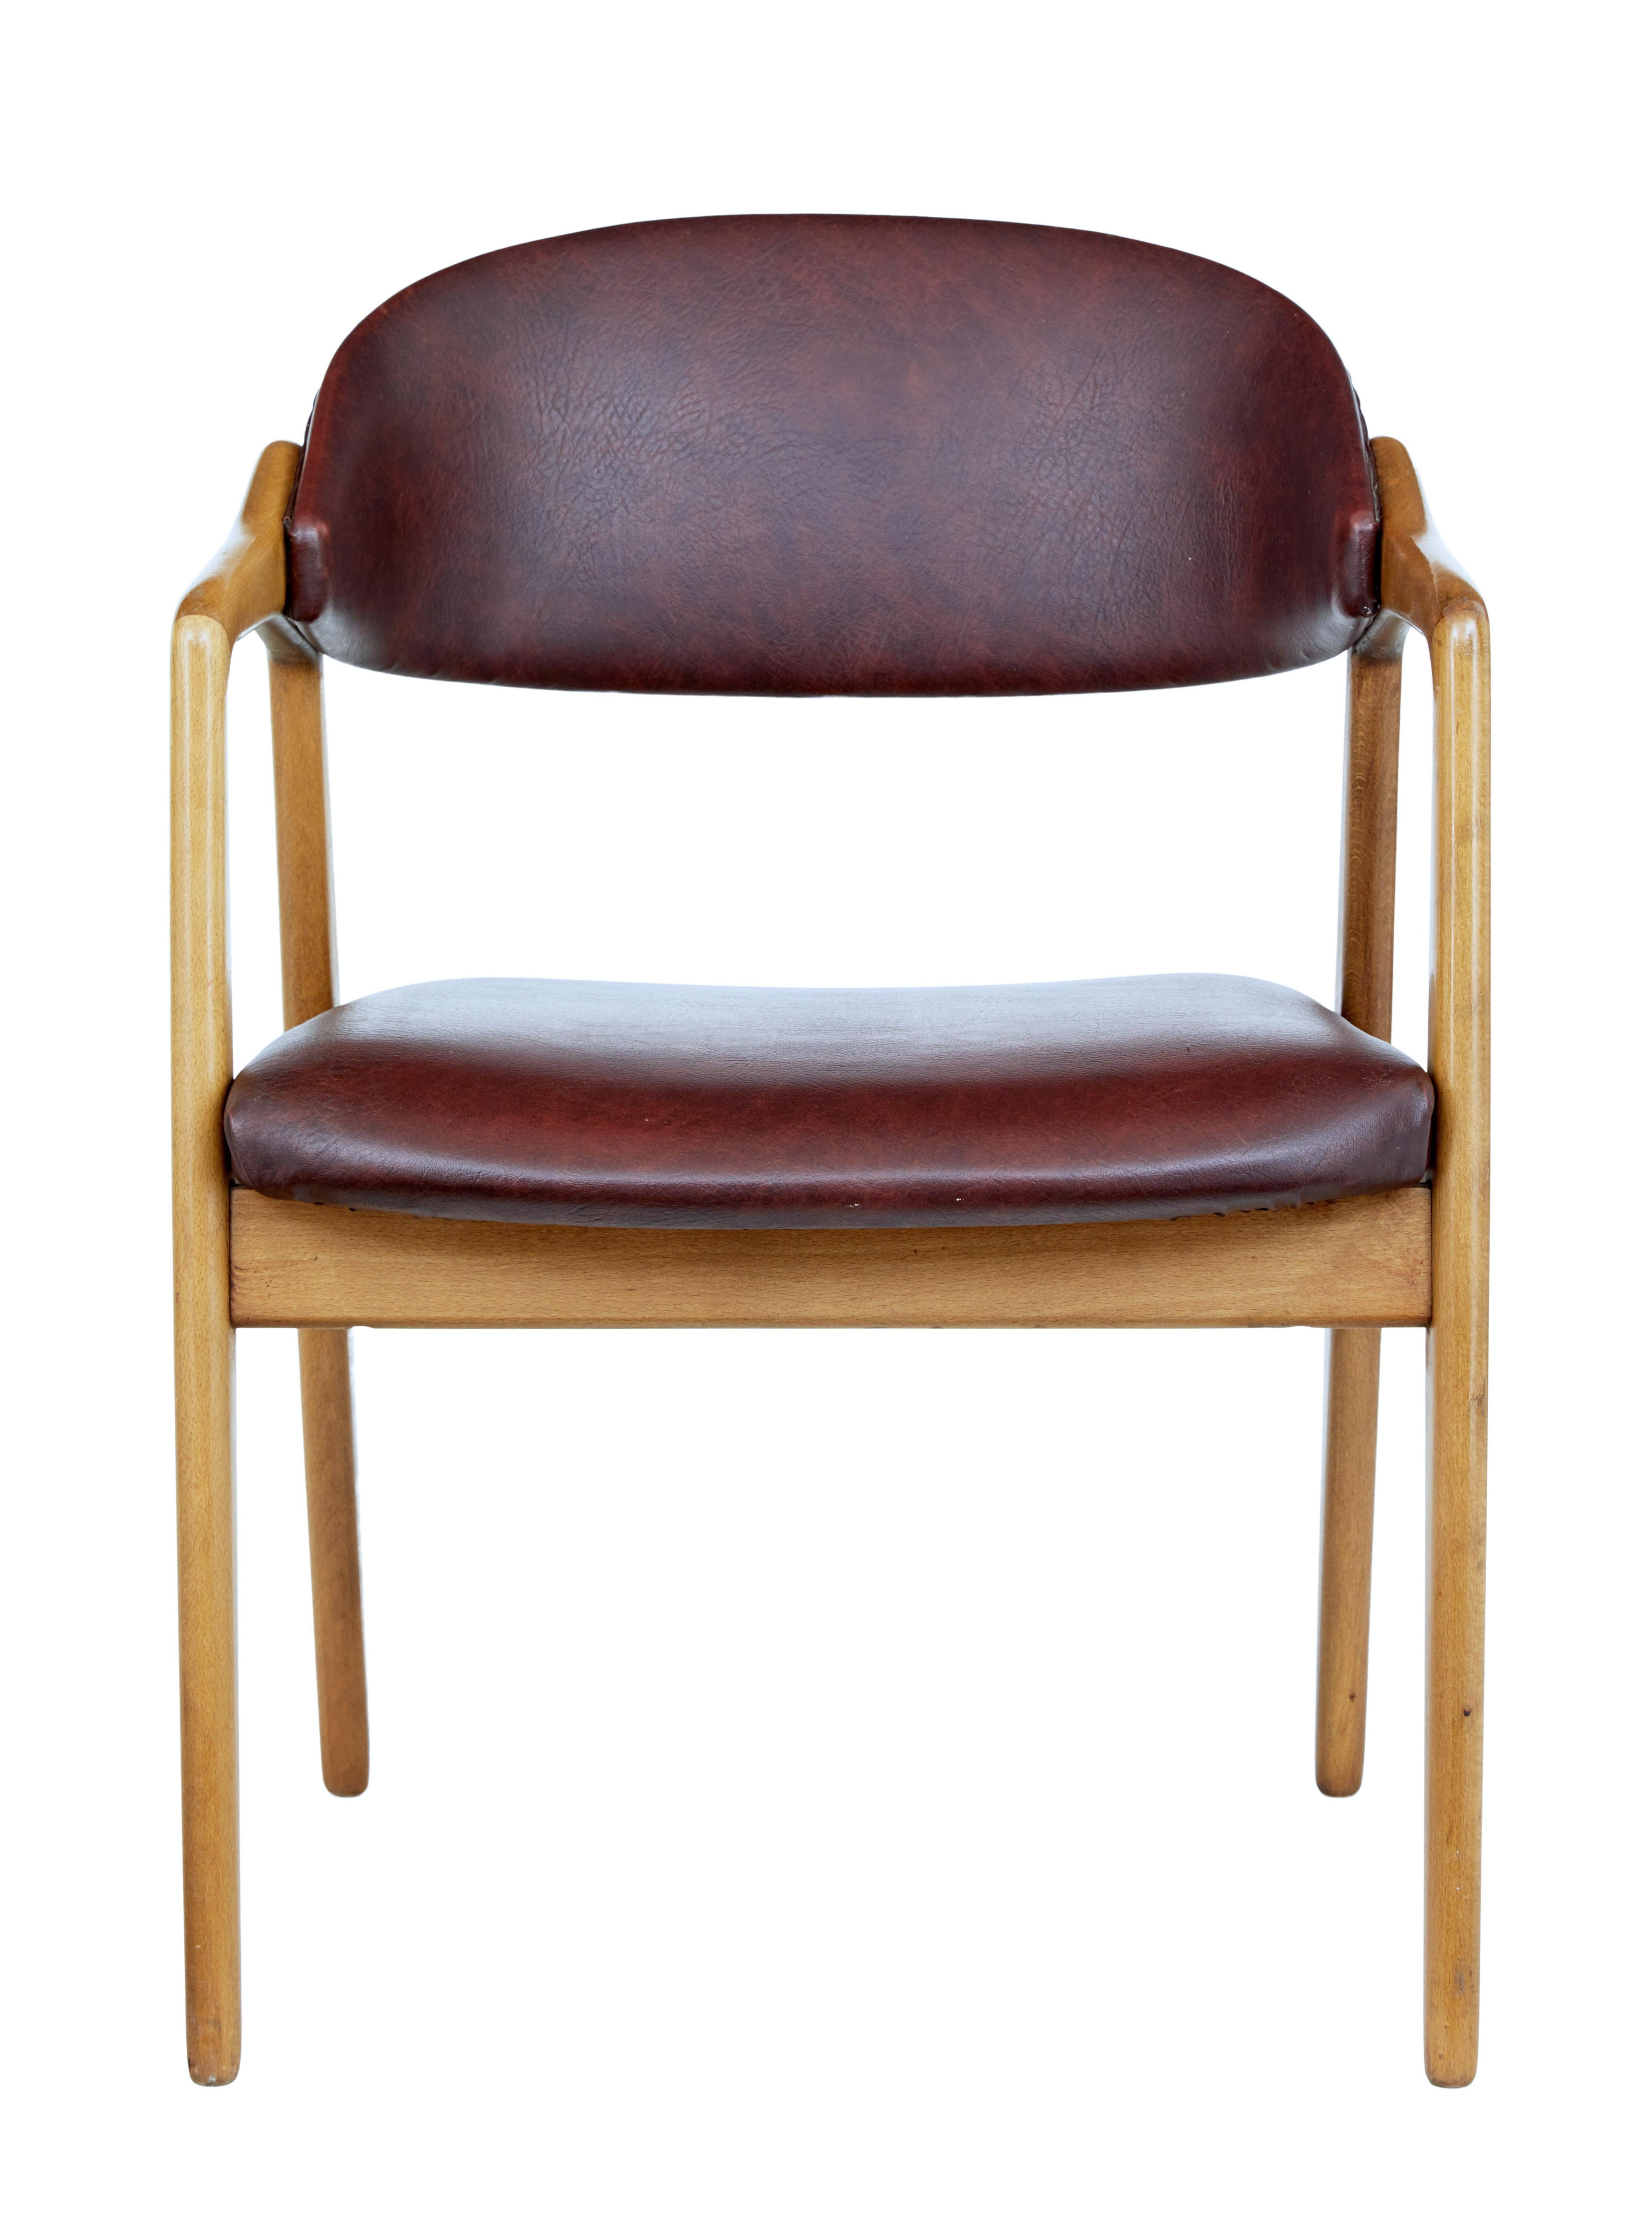 Mid-20th century teak desk chair by Gemla, circa 1960.

Elegant piece of Swedish design from the dio region in Sweden, produced by the Gemla furniture company.

Show frame teak sides with leatherette covered seats and back rests.

Minor